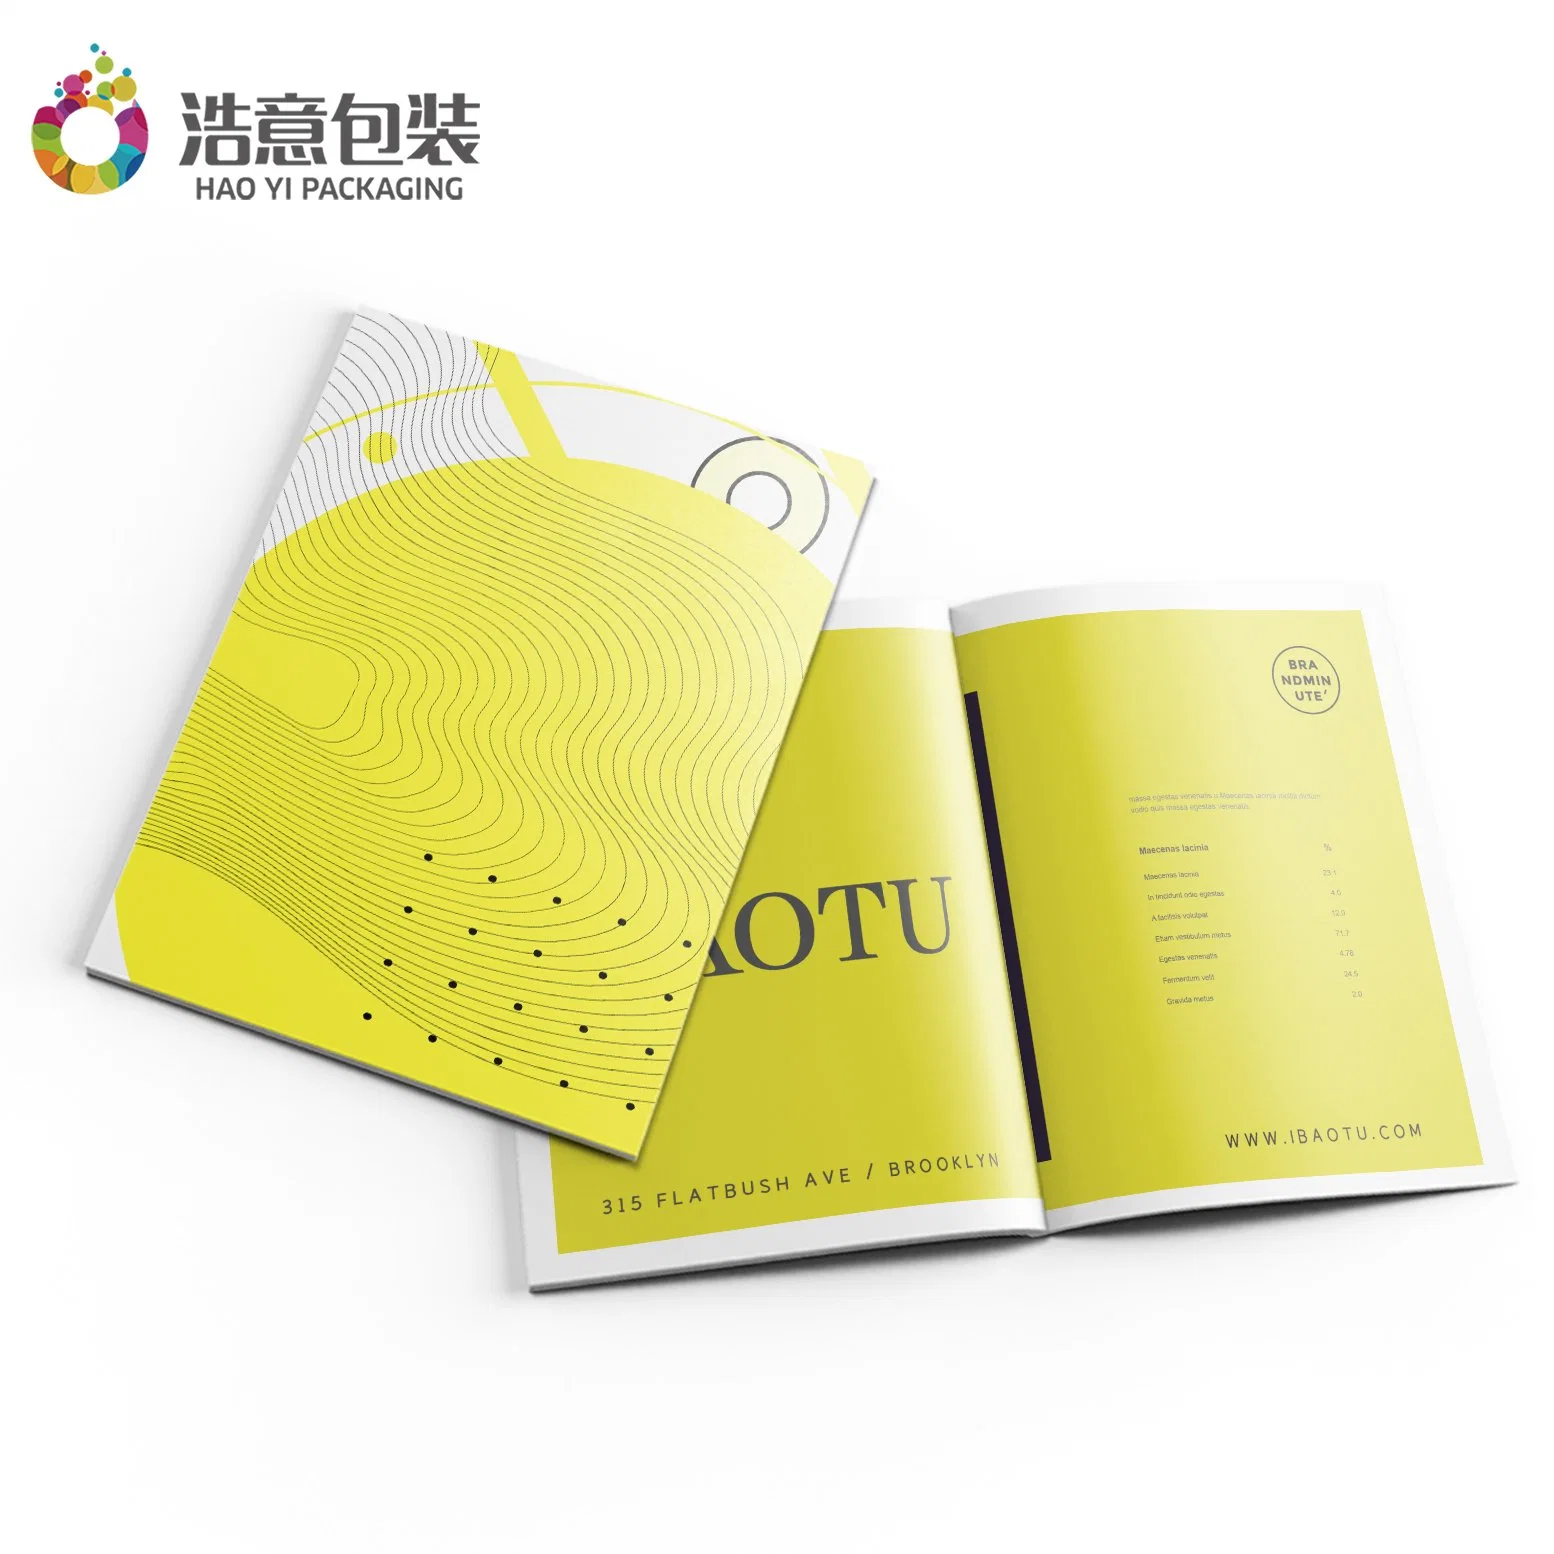 China Wholesale Promotional Custom Packaging & Printing High Quality Gift Set Note Book